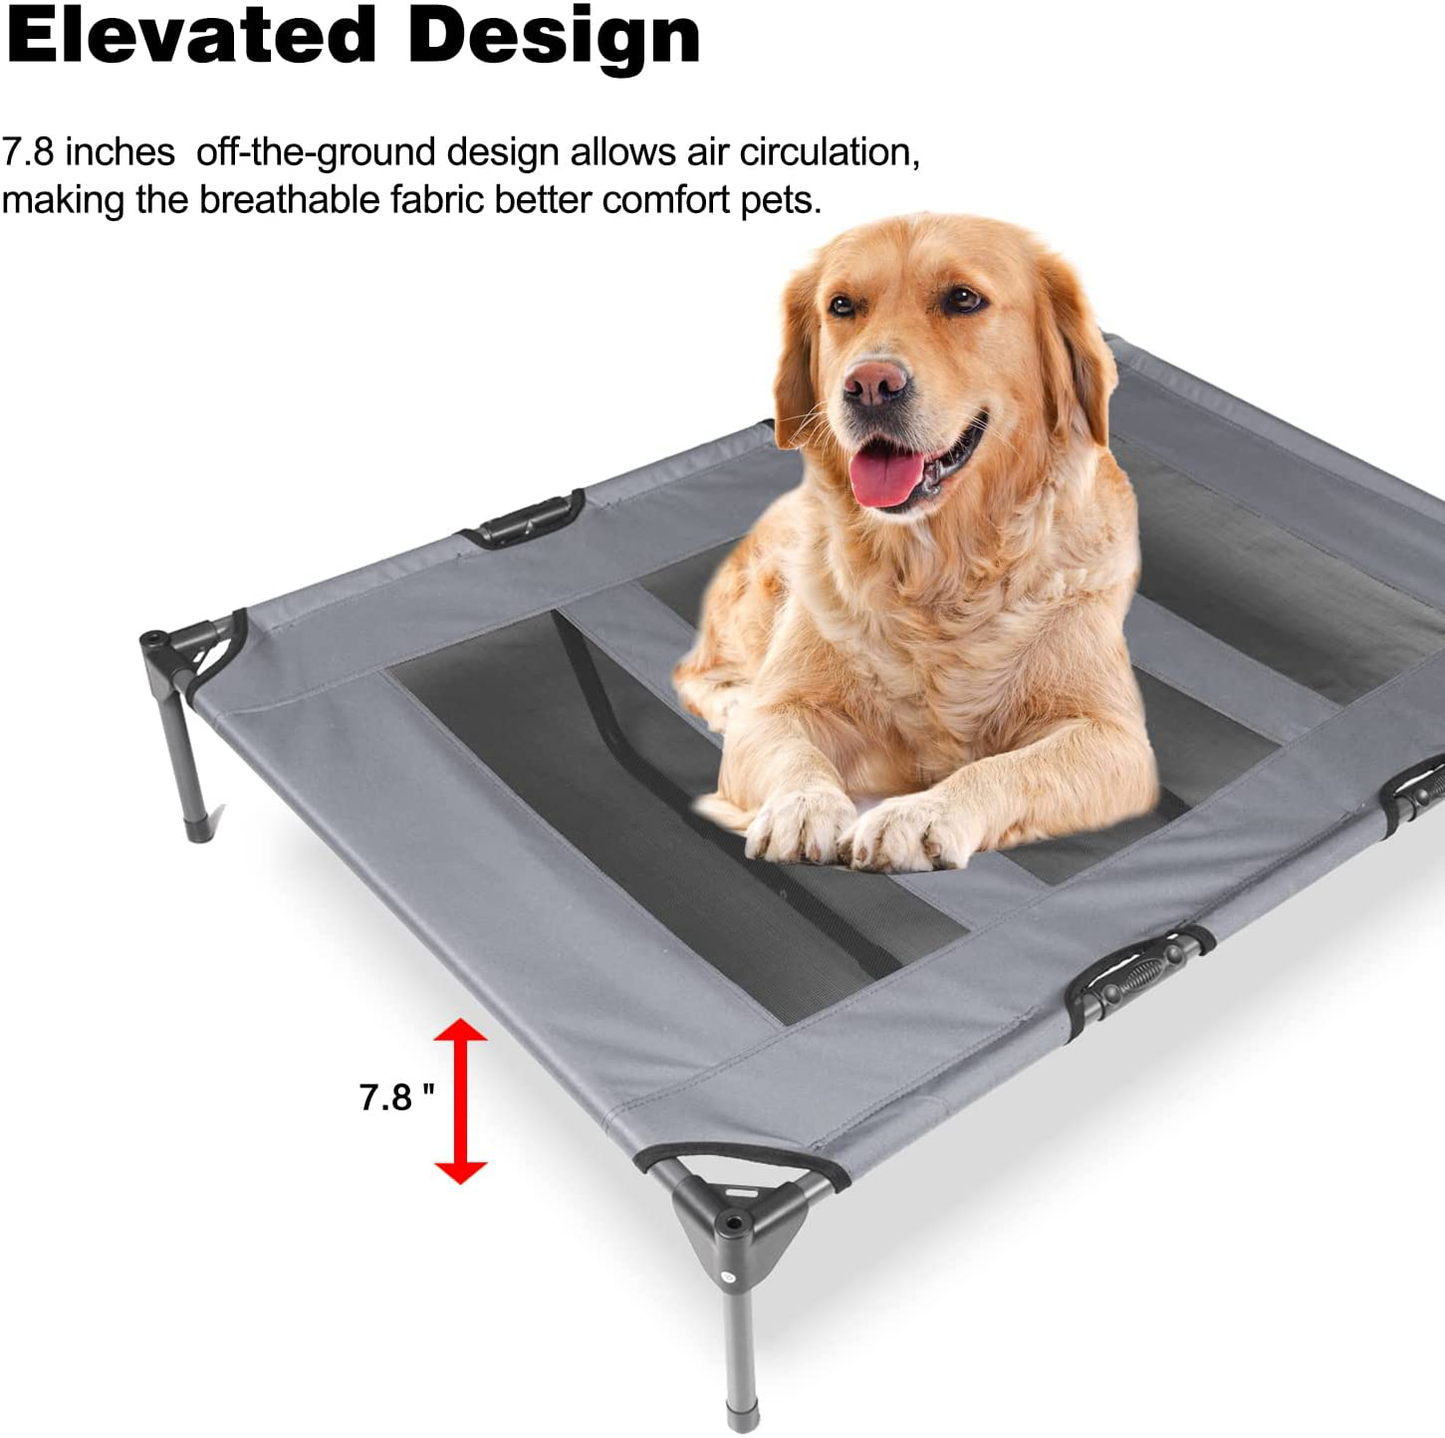 Hlong Elevated Pet Cot, Portable Raised Dog Bed for Indoor Outdoor Use,1 Replacement Cover